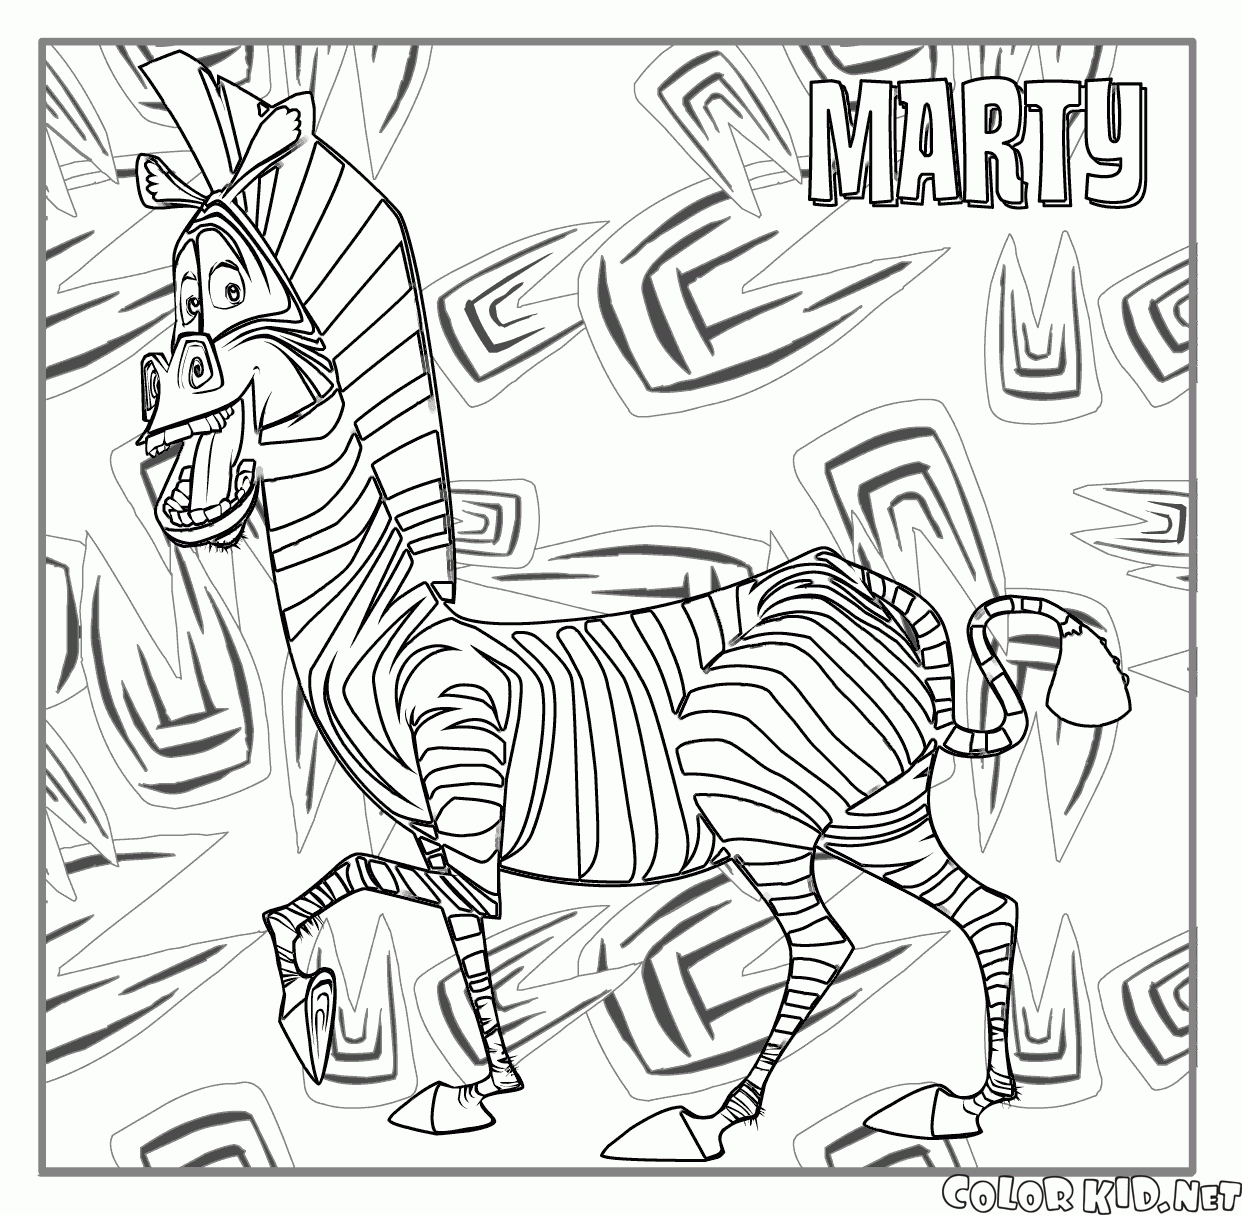 Download Coloring page - Madagascar